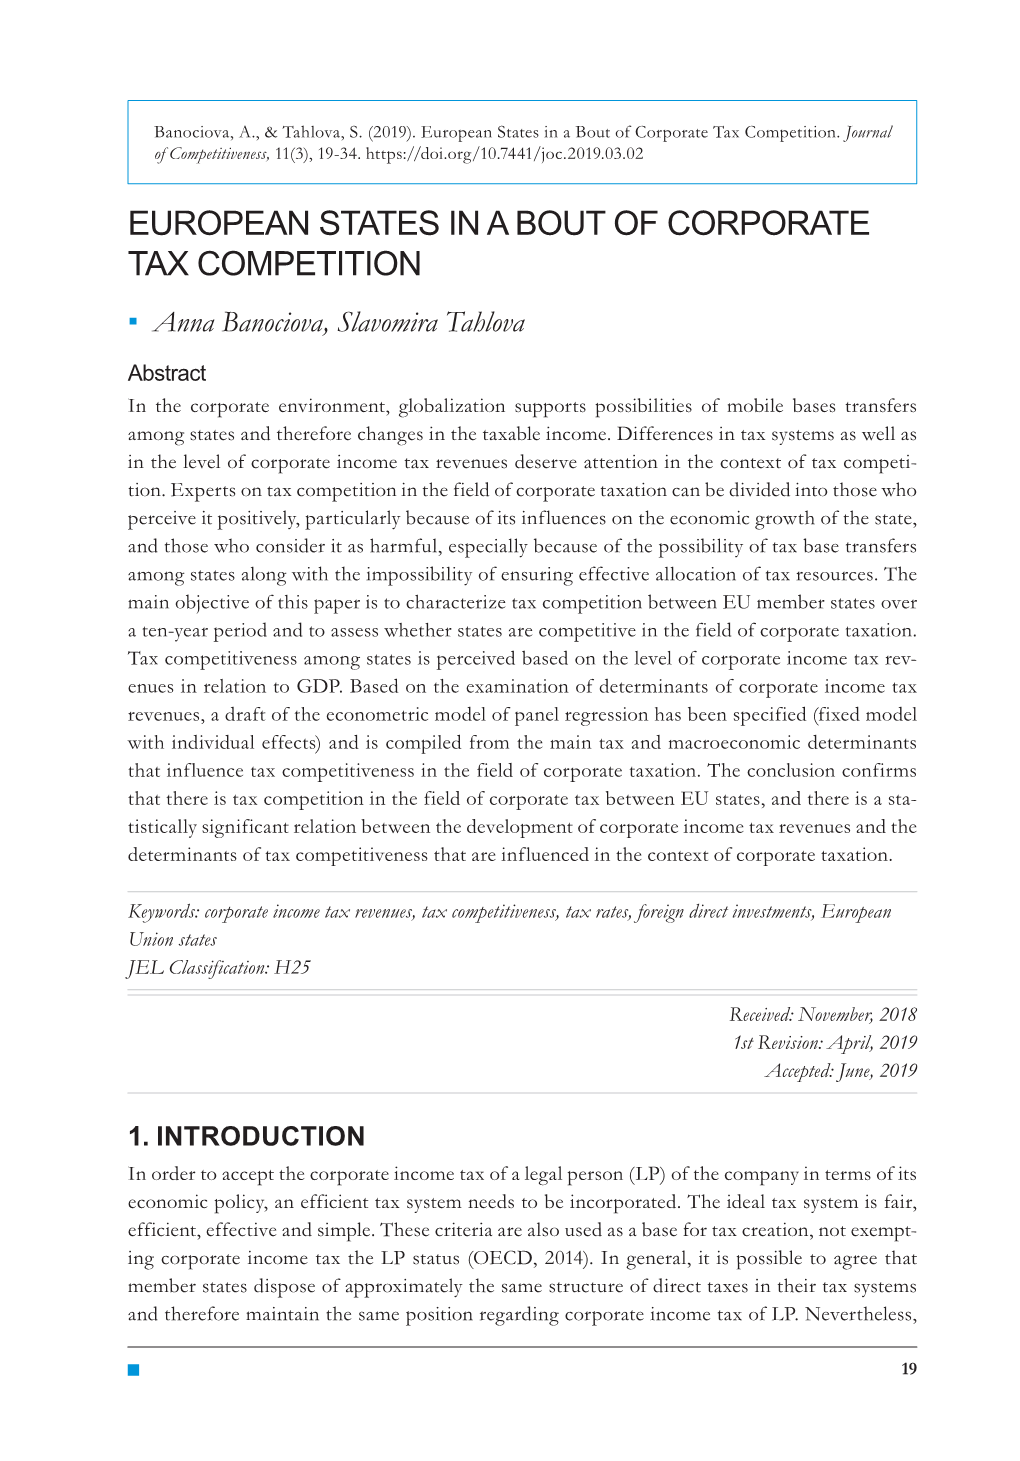 European States in a Bout of Corporate Tax Competition